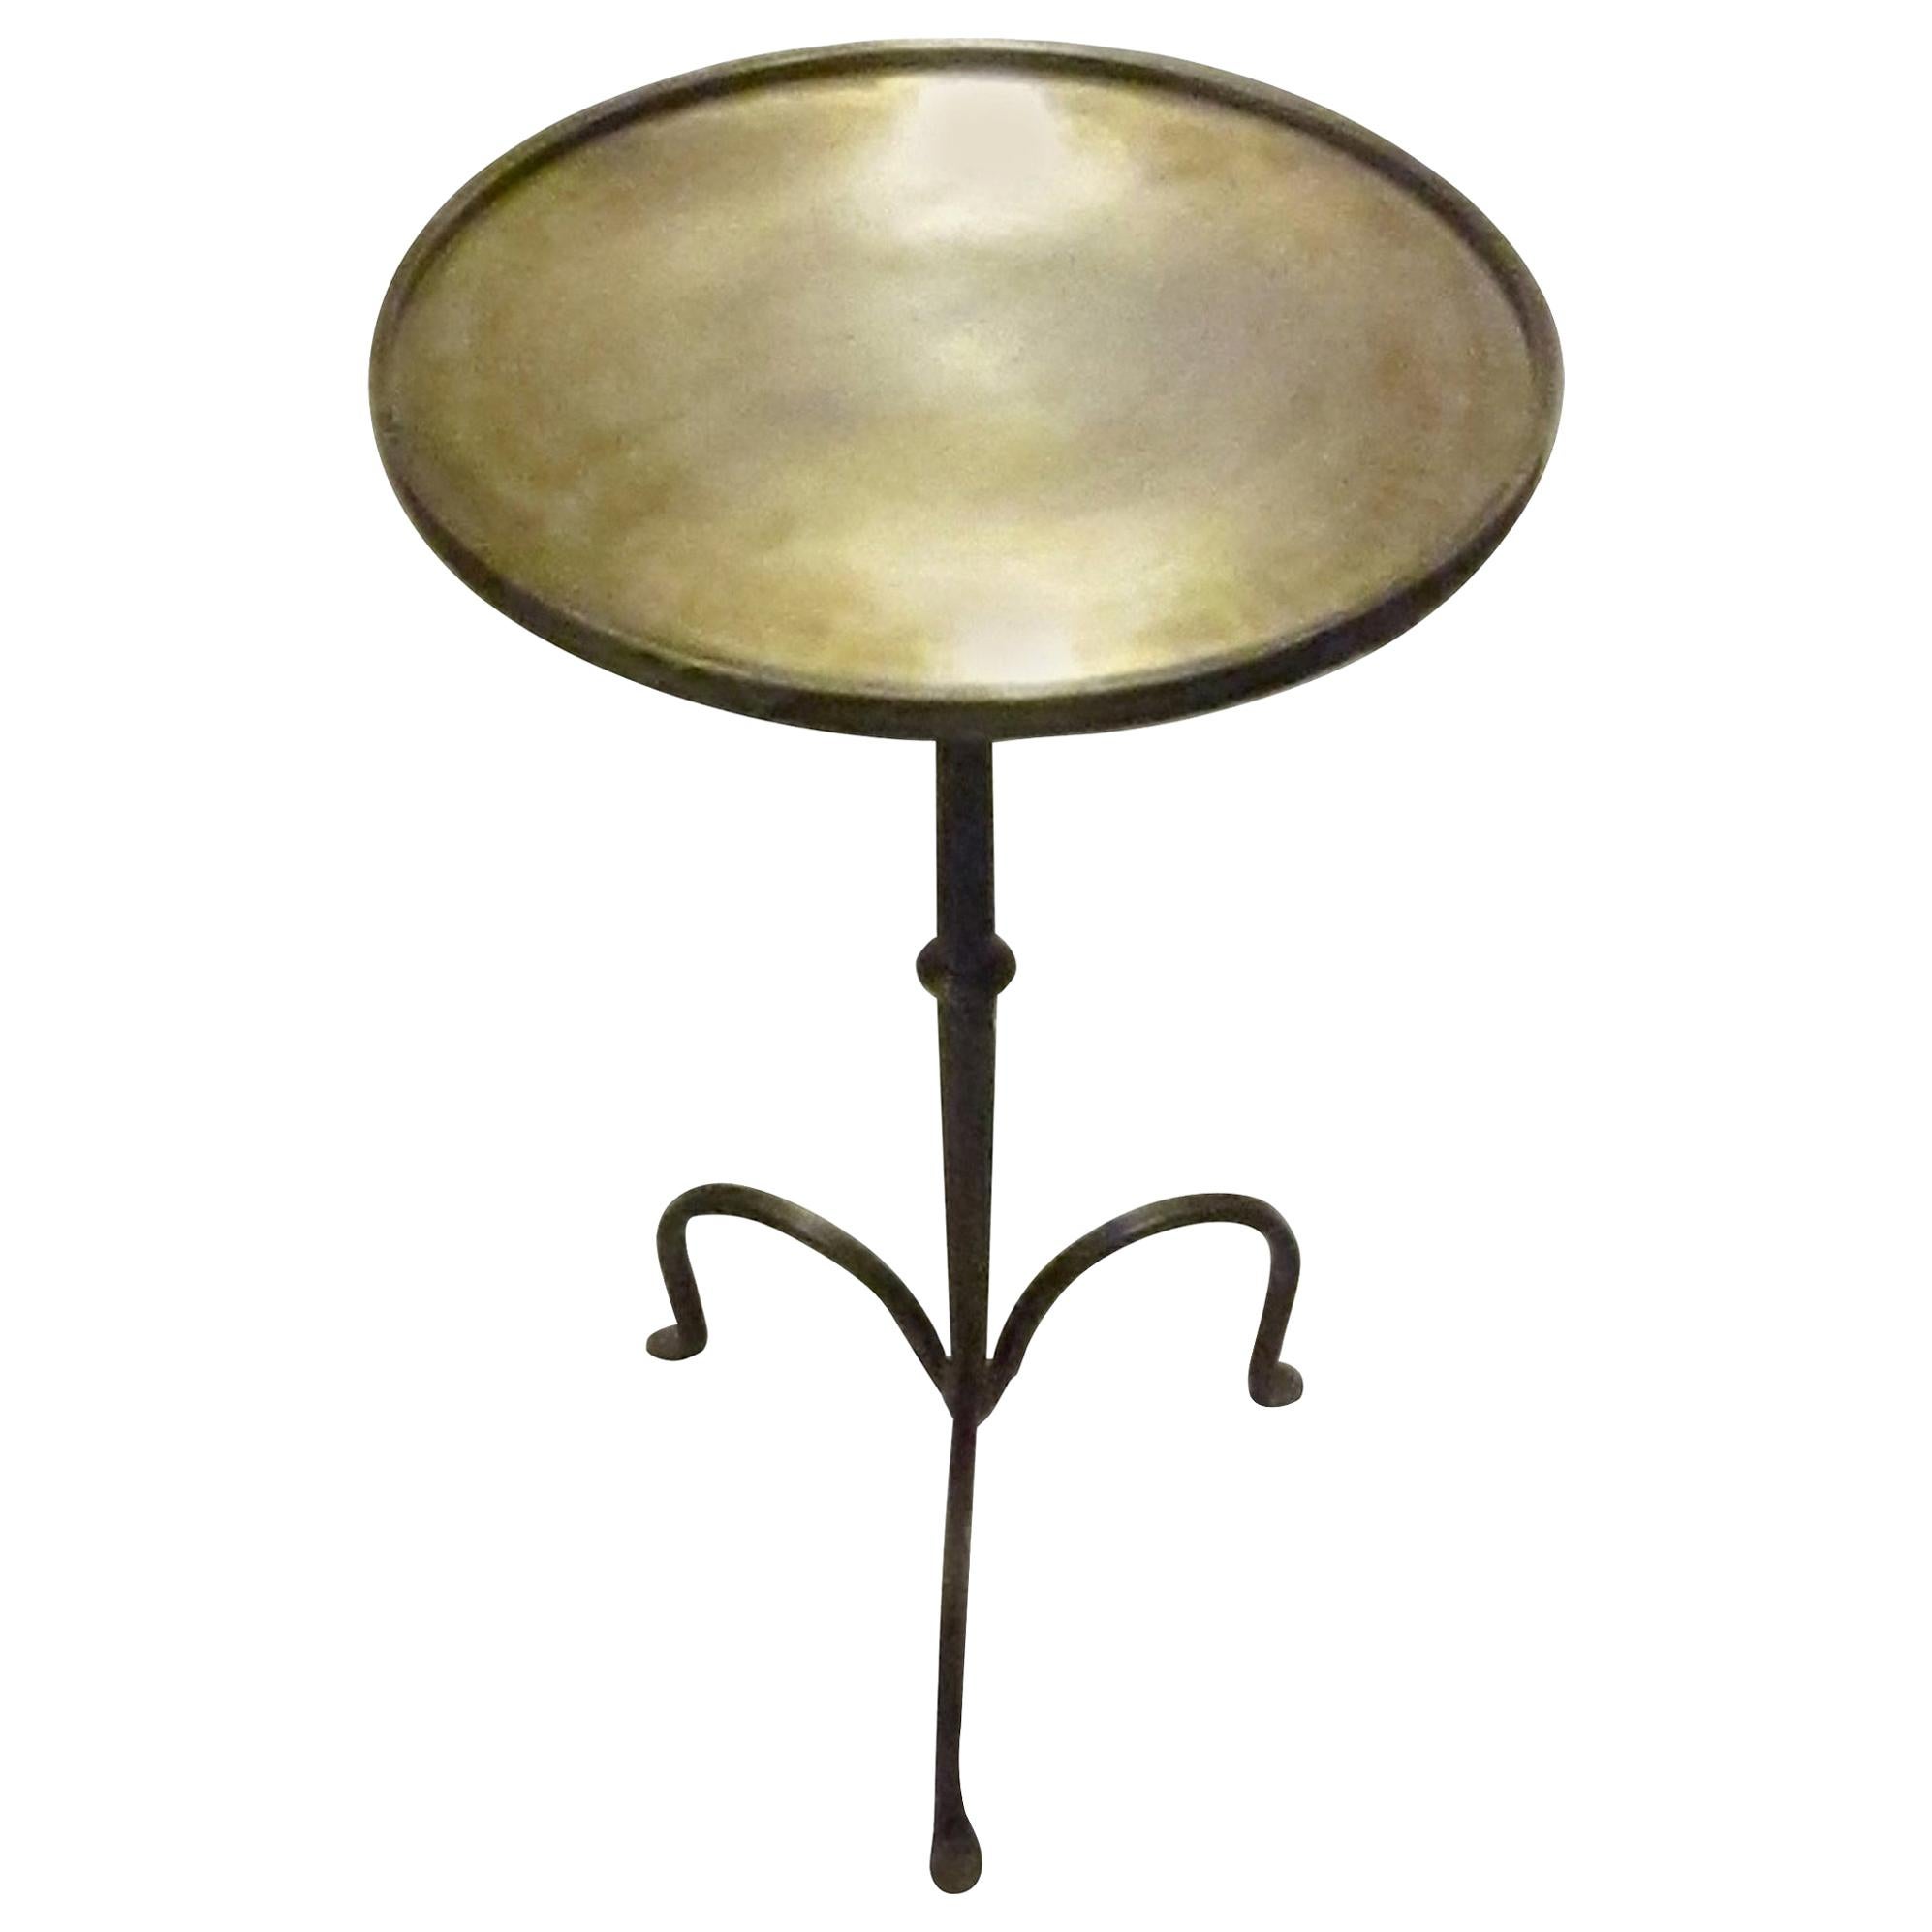 Brushed Brass Small Side or Cocktail Table, China, Contemporary